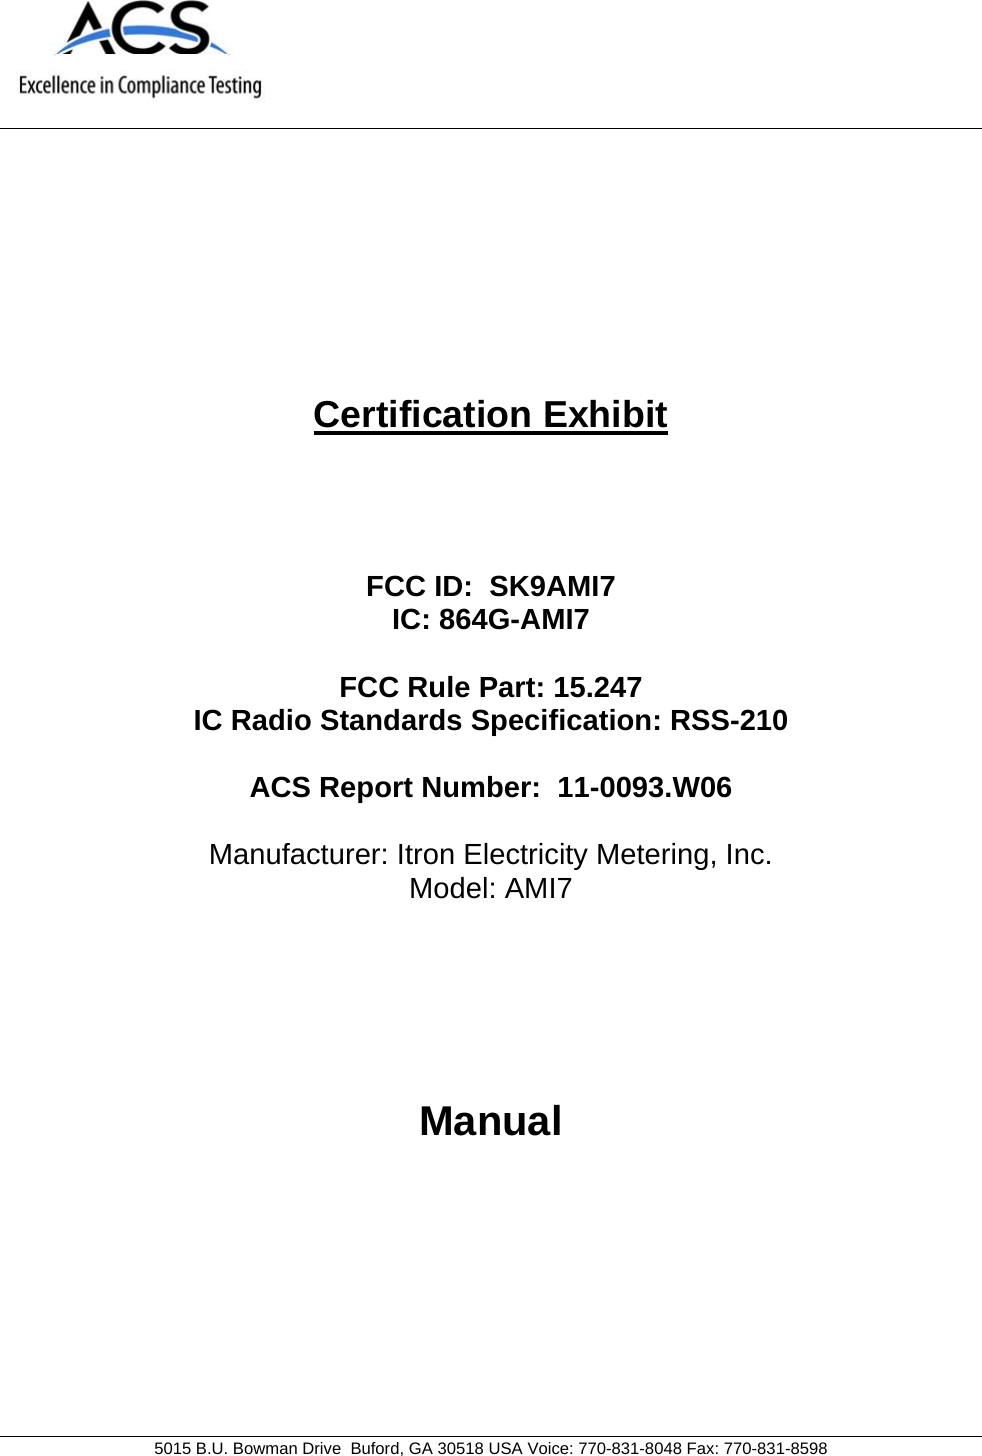     5015 B.U. Bowman Drive  Buford, GA 30518 USA Voice: 770-831-8048 Fax: 770-831-8598   Certification Exhibit     FCC ID:  SK9AMI7 IC: 864G-AMI7  FCC Rule Part: 15.247 IC Radio Standards Specification: RSS-210  ACS Report Number:  11-0093.W06   Manufacturer: Itron Electricity Metering, Inc. Model: AMI7     Manual  